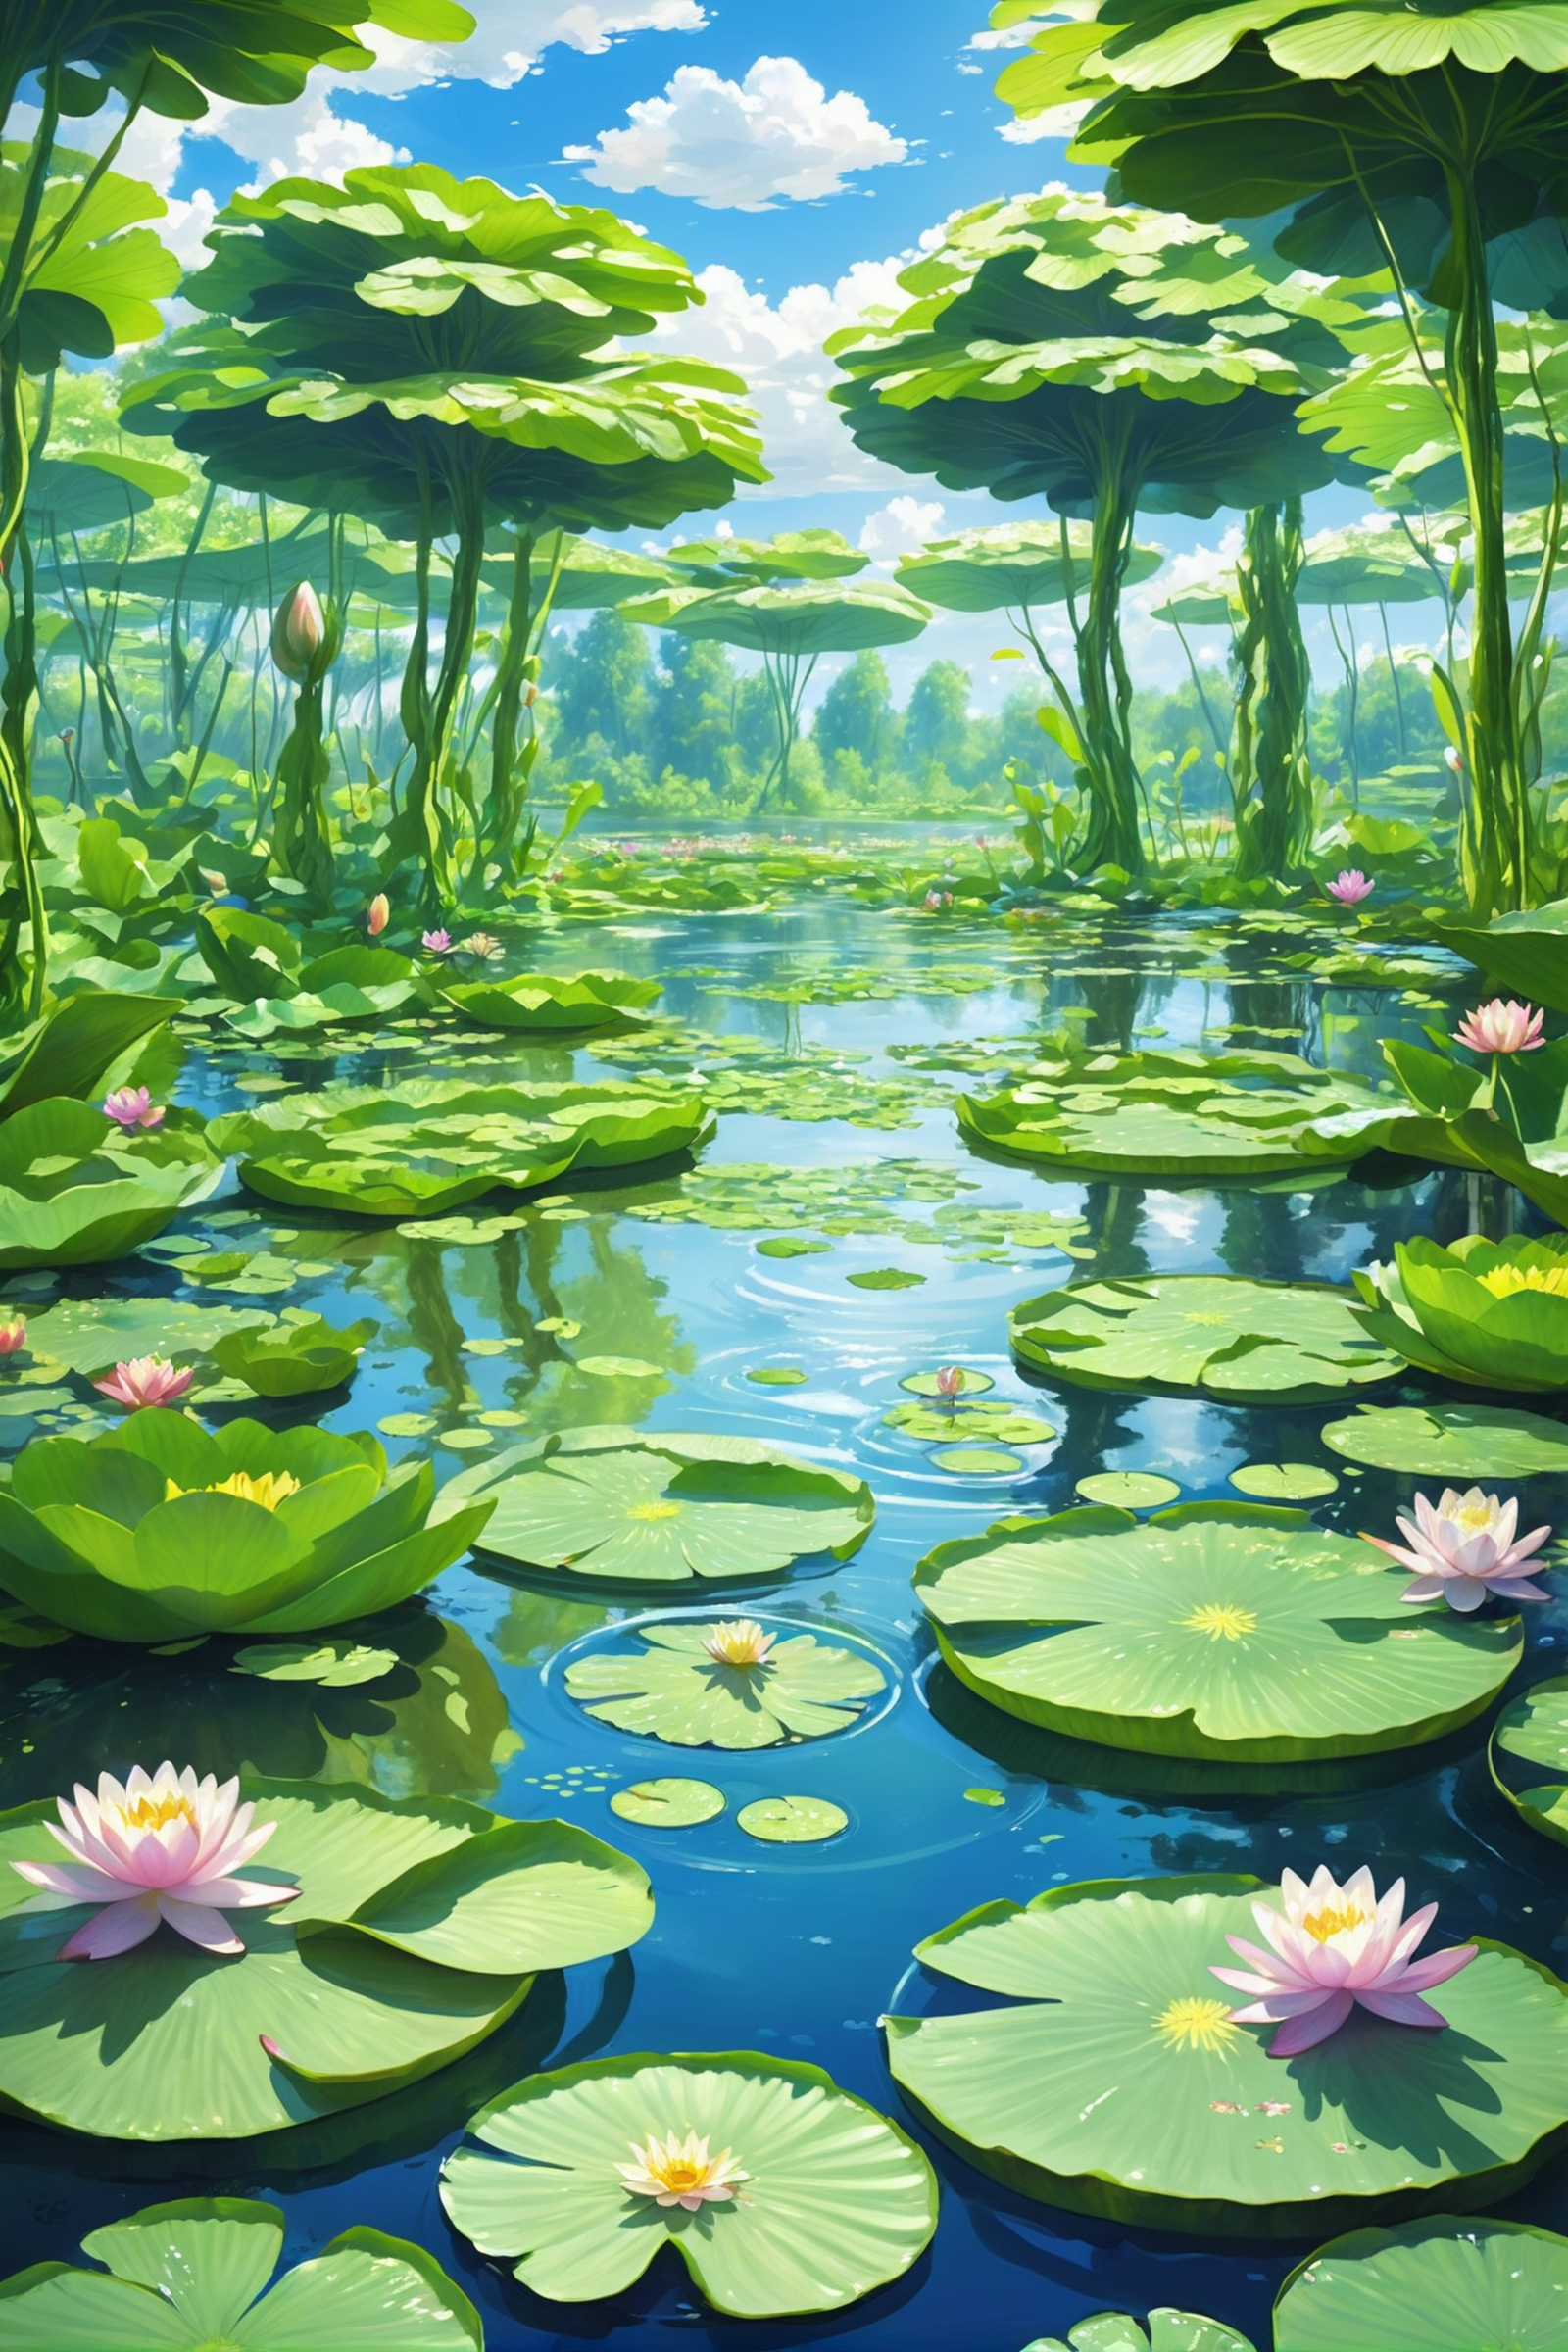 A vibrant green lily pond with water lilies and a forest in the background.